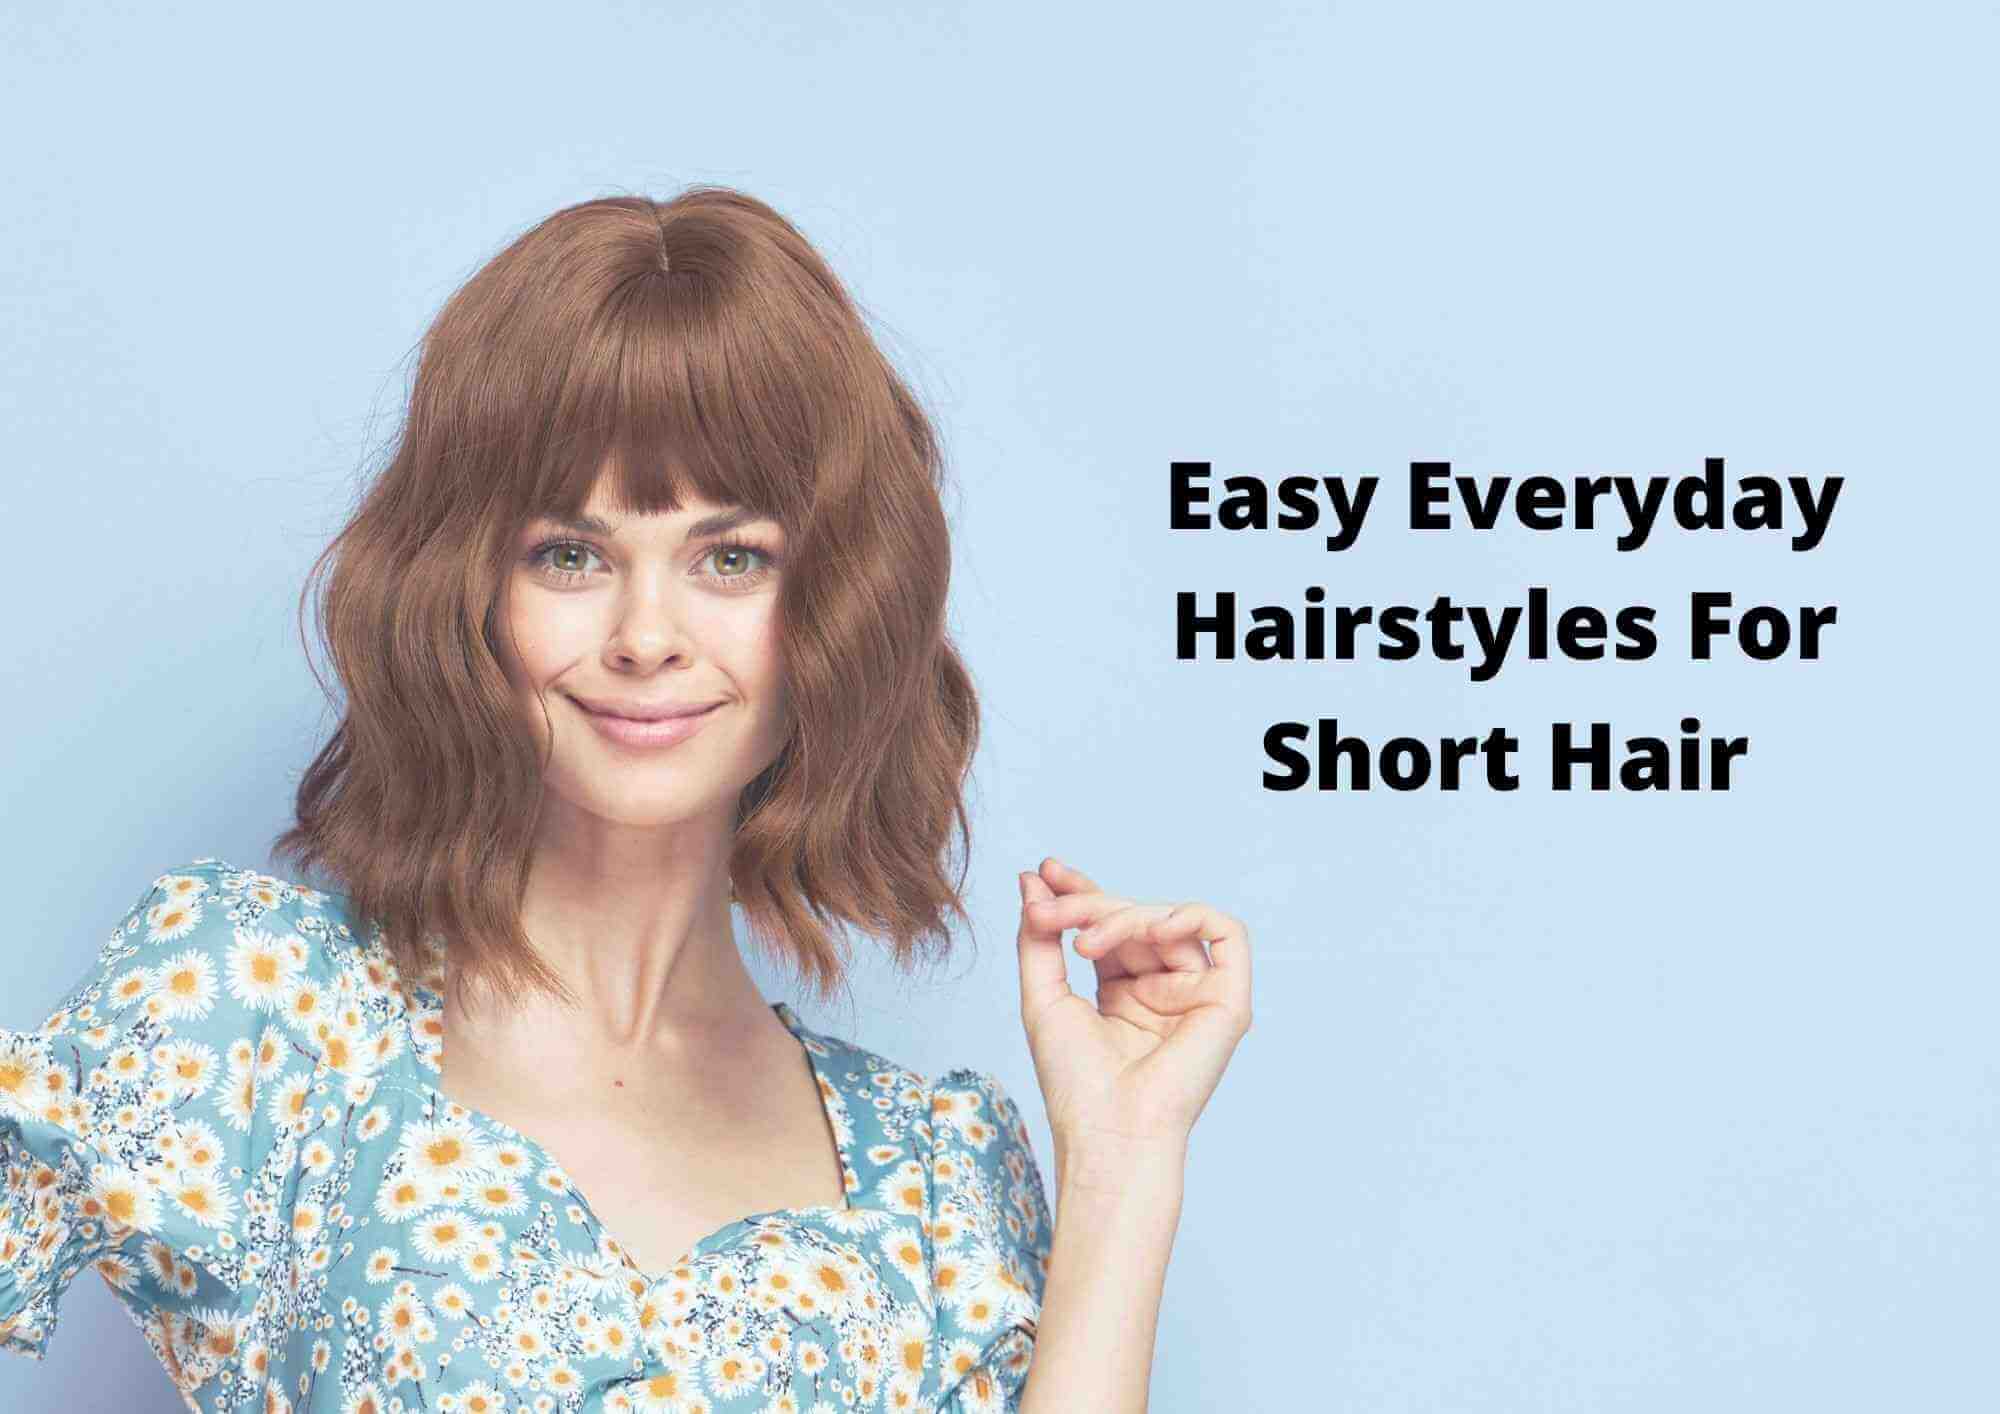 10 Easy Everyday Hairstyles For Short Hair 2023 - Hair Everyday Review